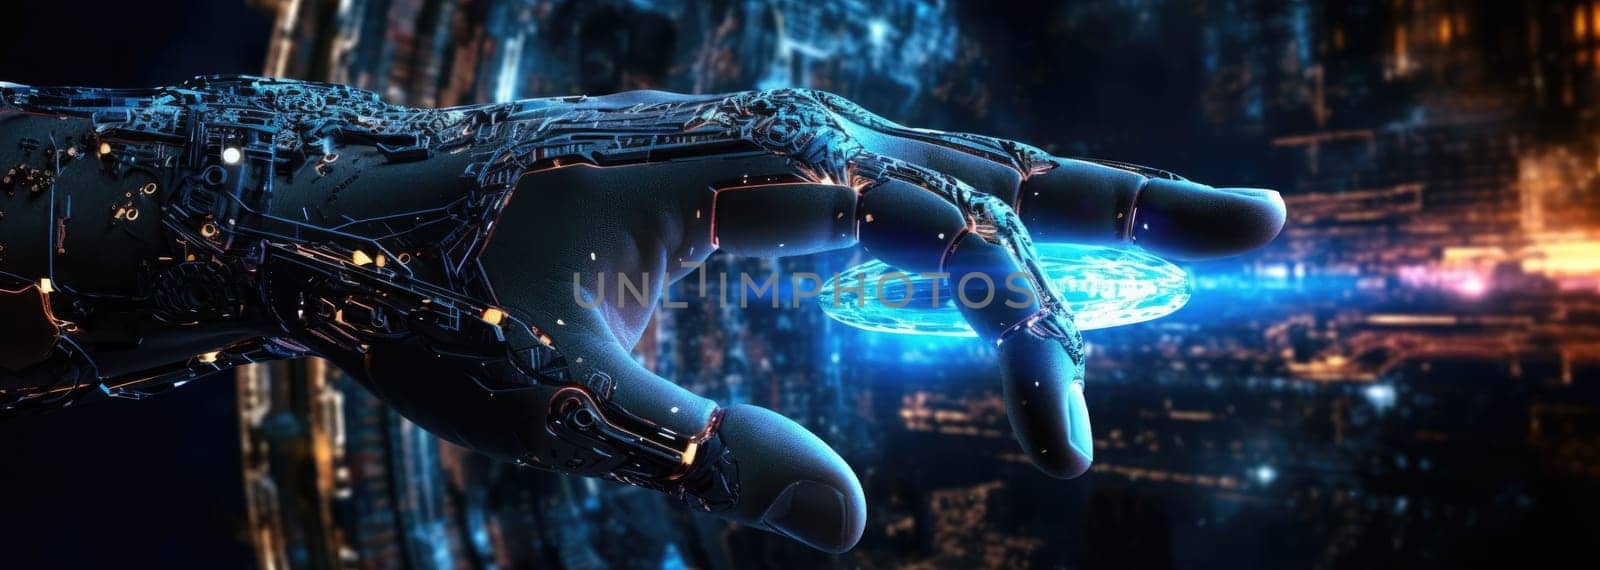 The human hand touches artificial intelligence by cherezoff